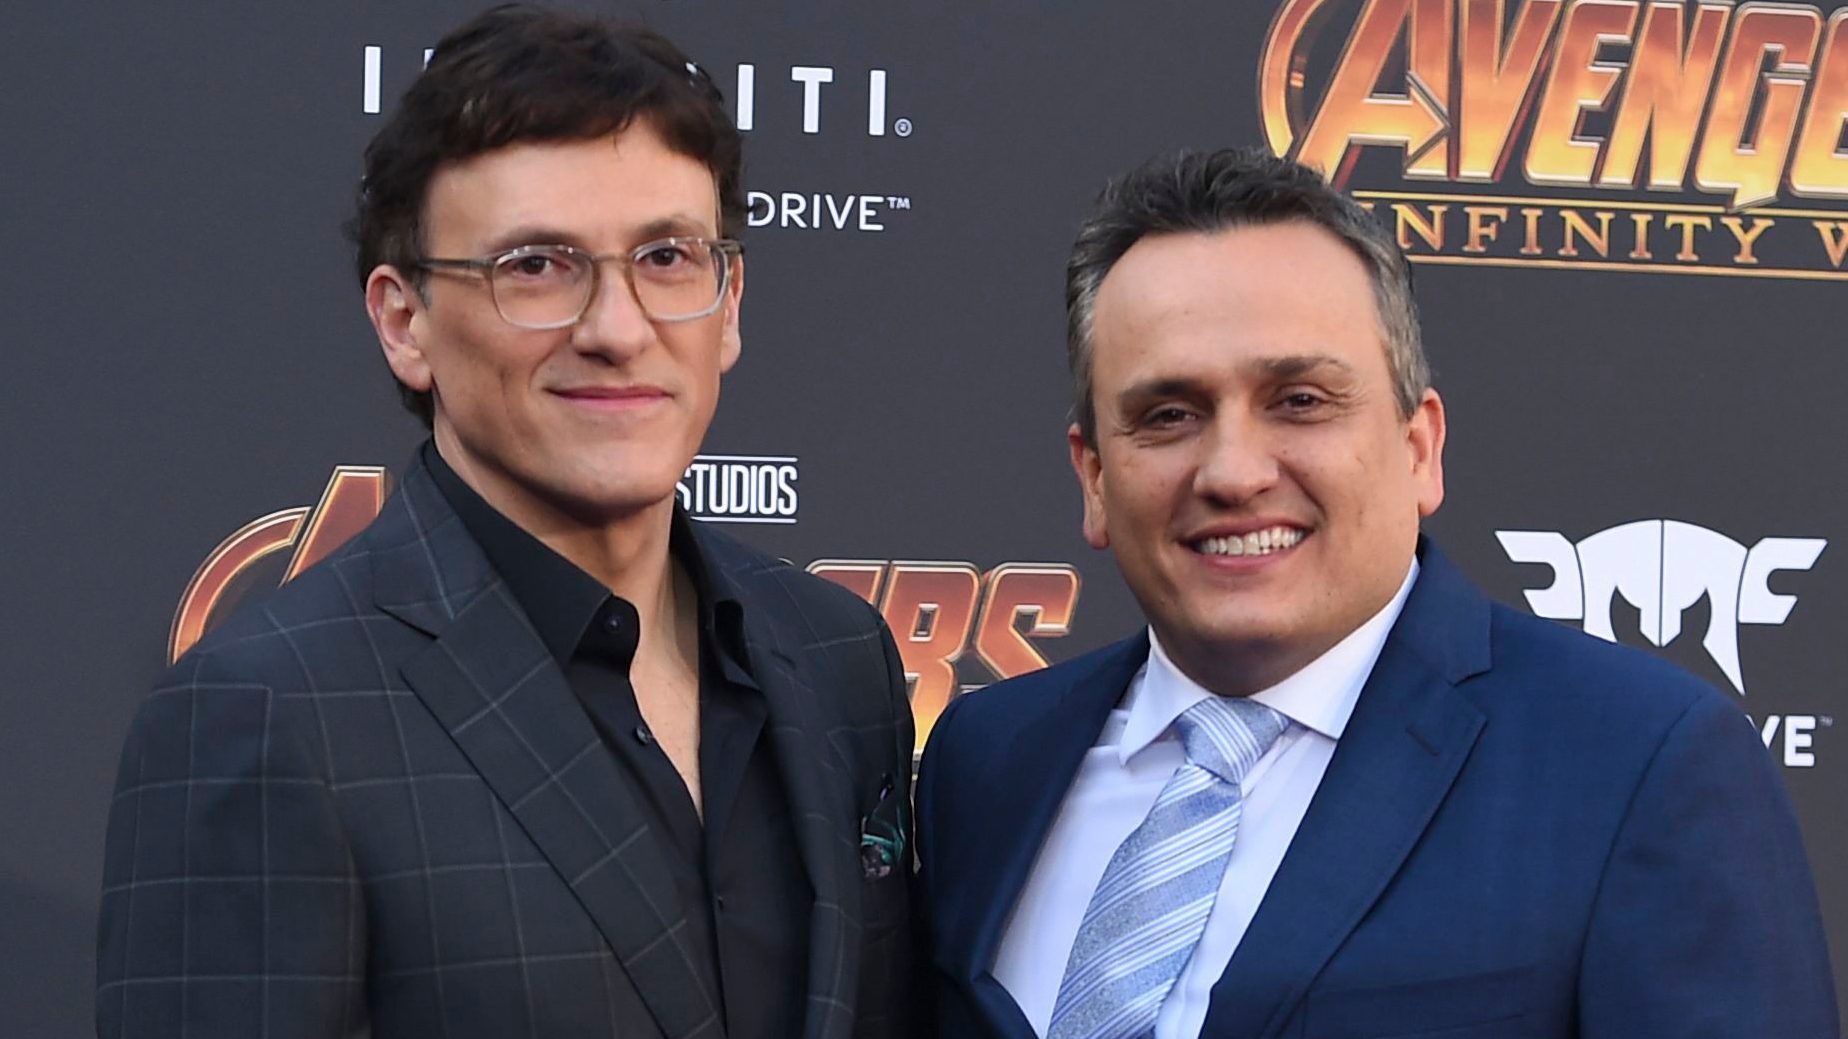 ANTHONY RUSSO & JOE RUSSO